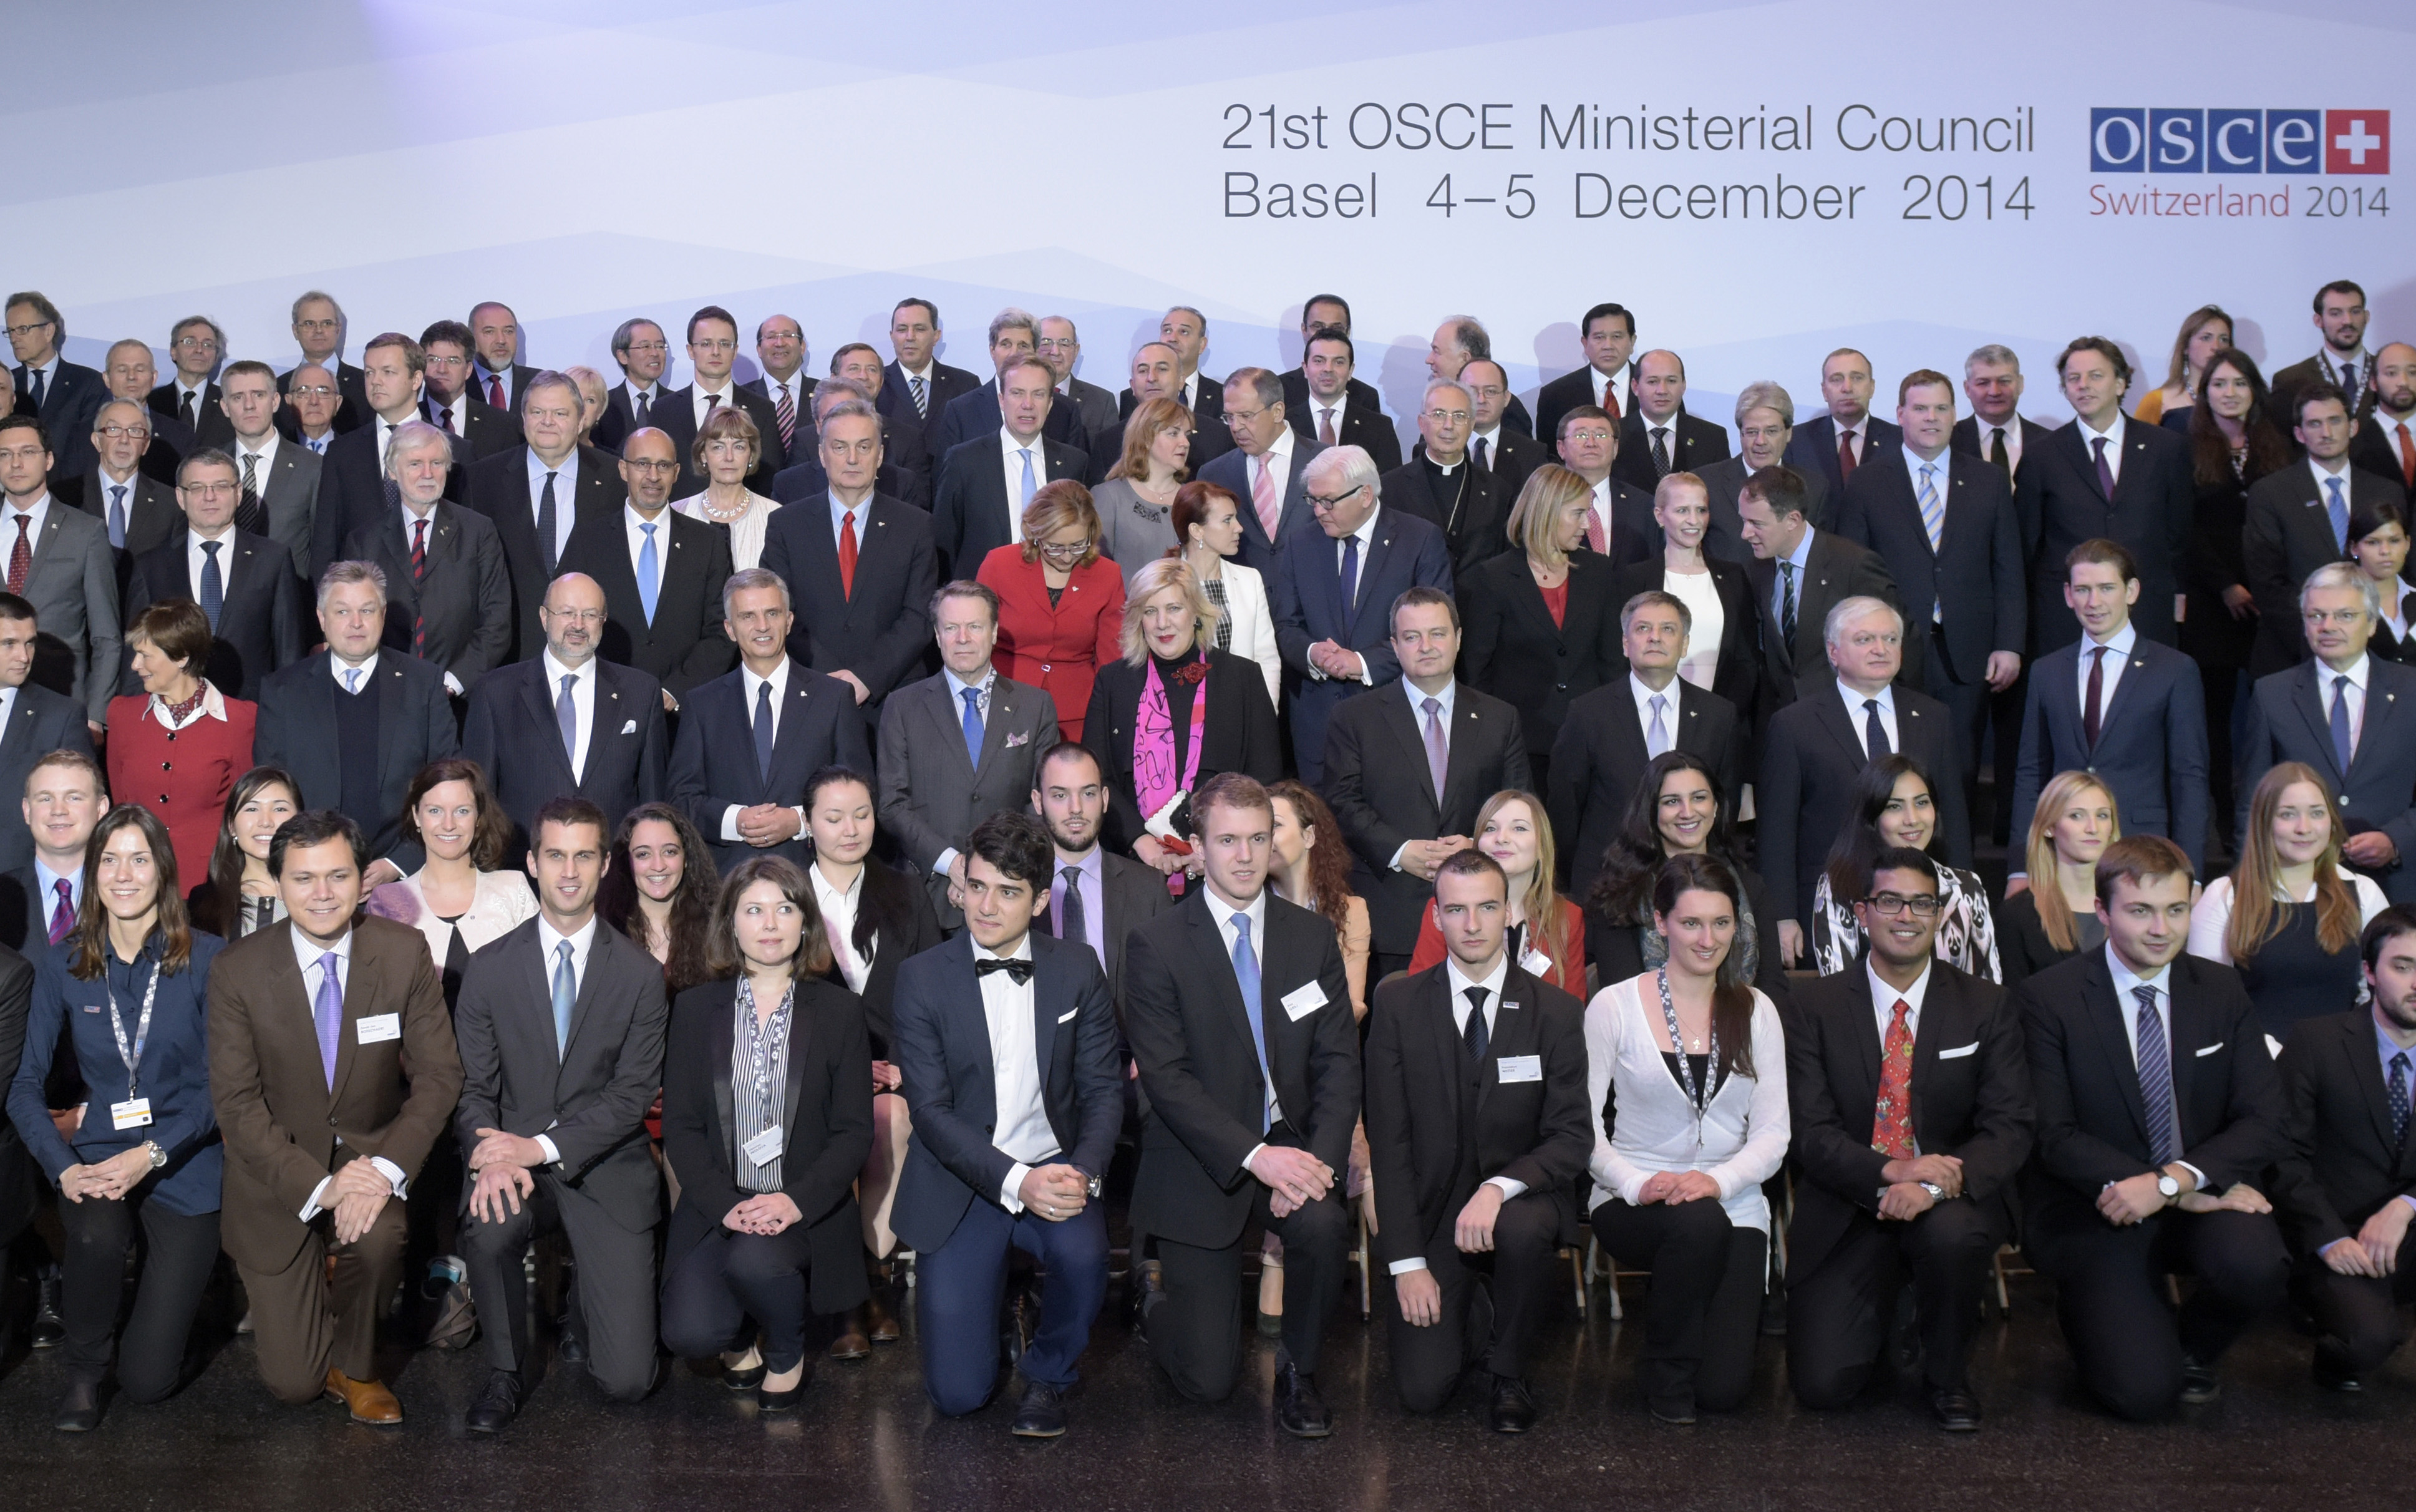 The OSCE youth ambassadors posing for a group photo with the foreign ministers at the Ministerial Council meeting in December 2014